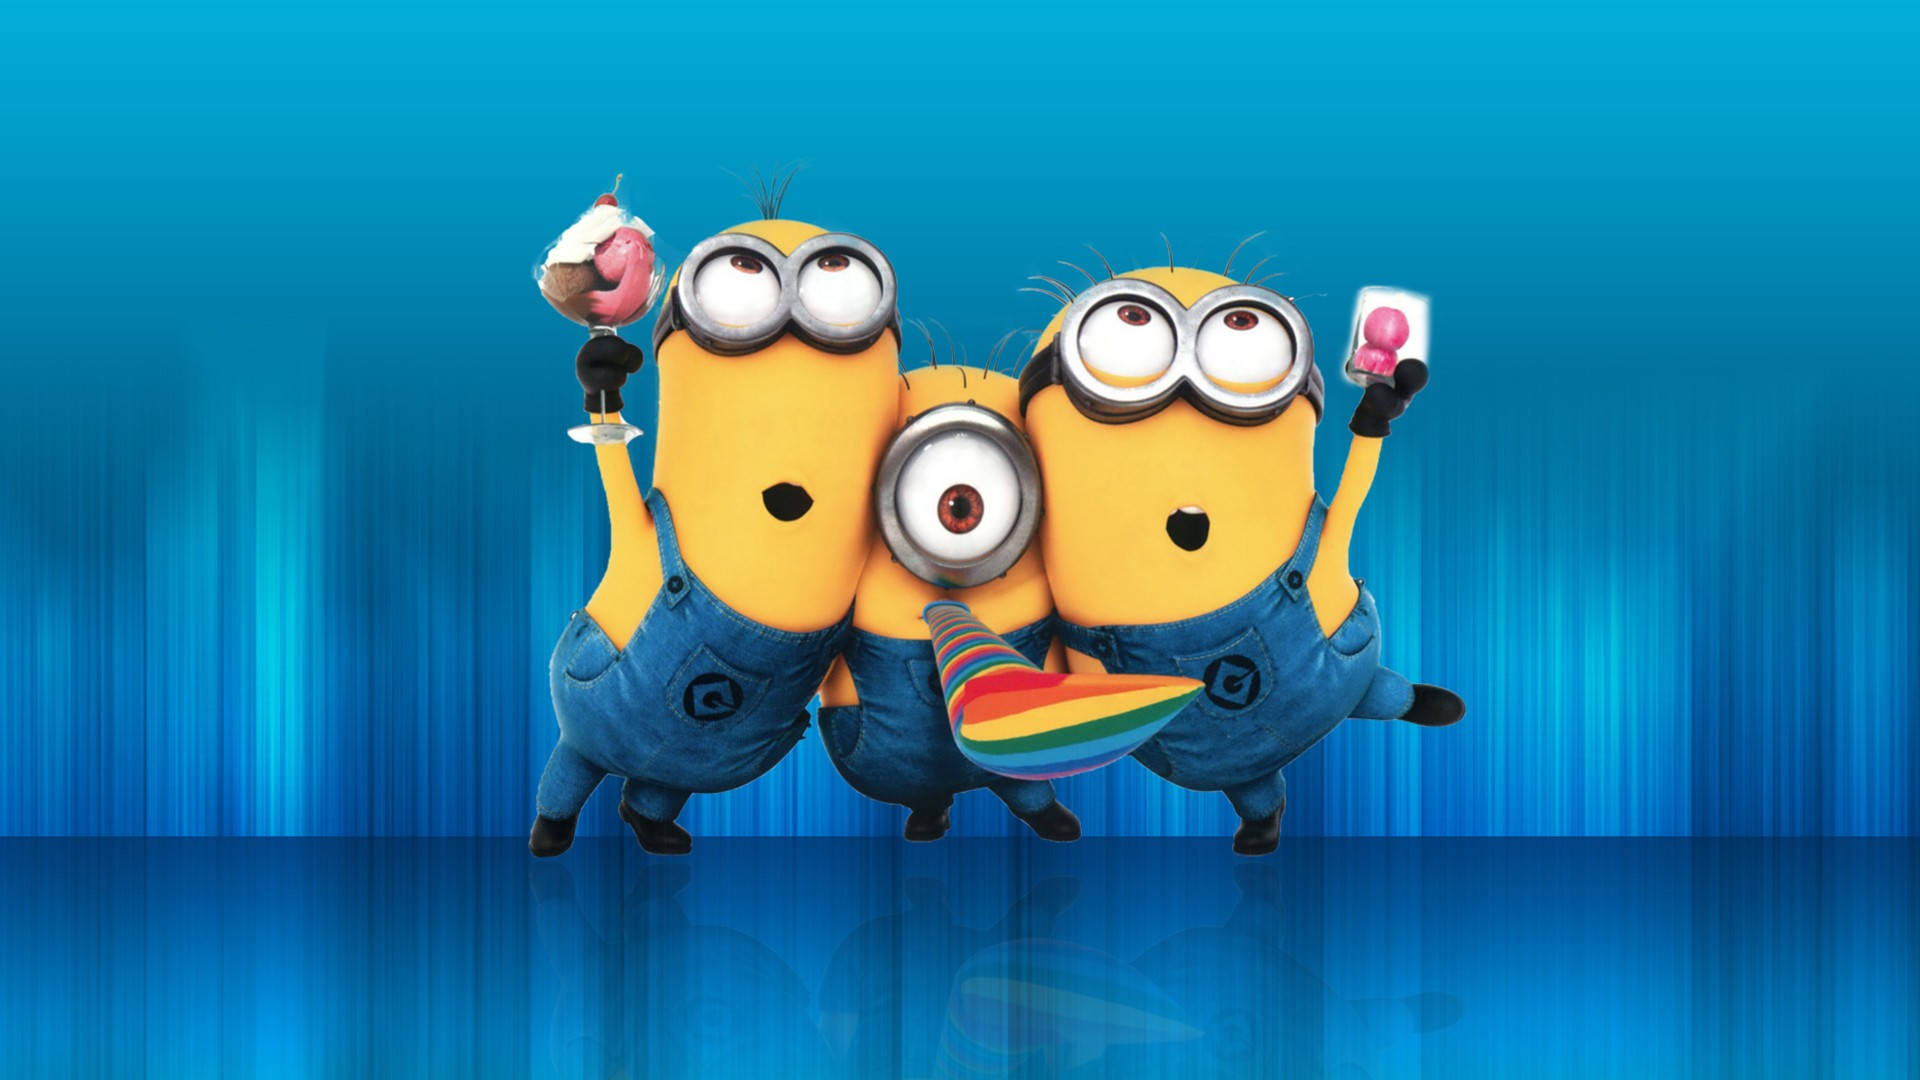 Minions Celebrating Together Wallpaper